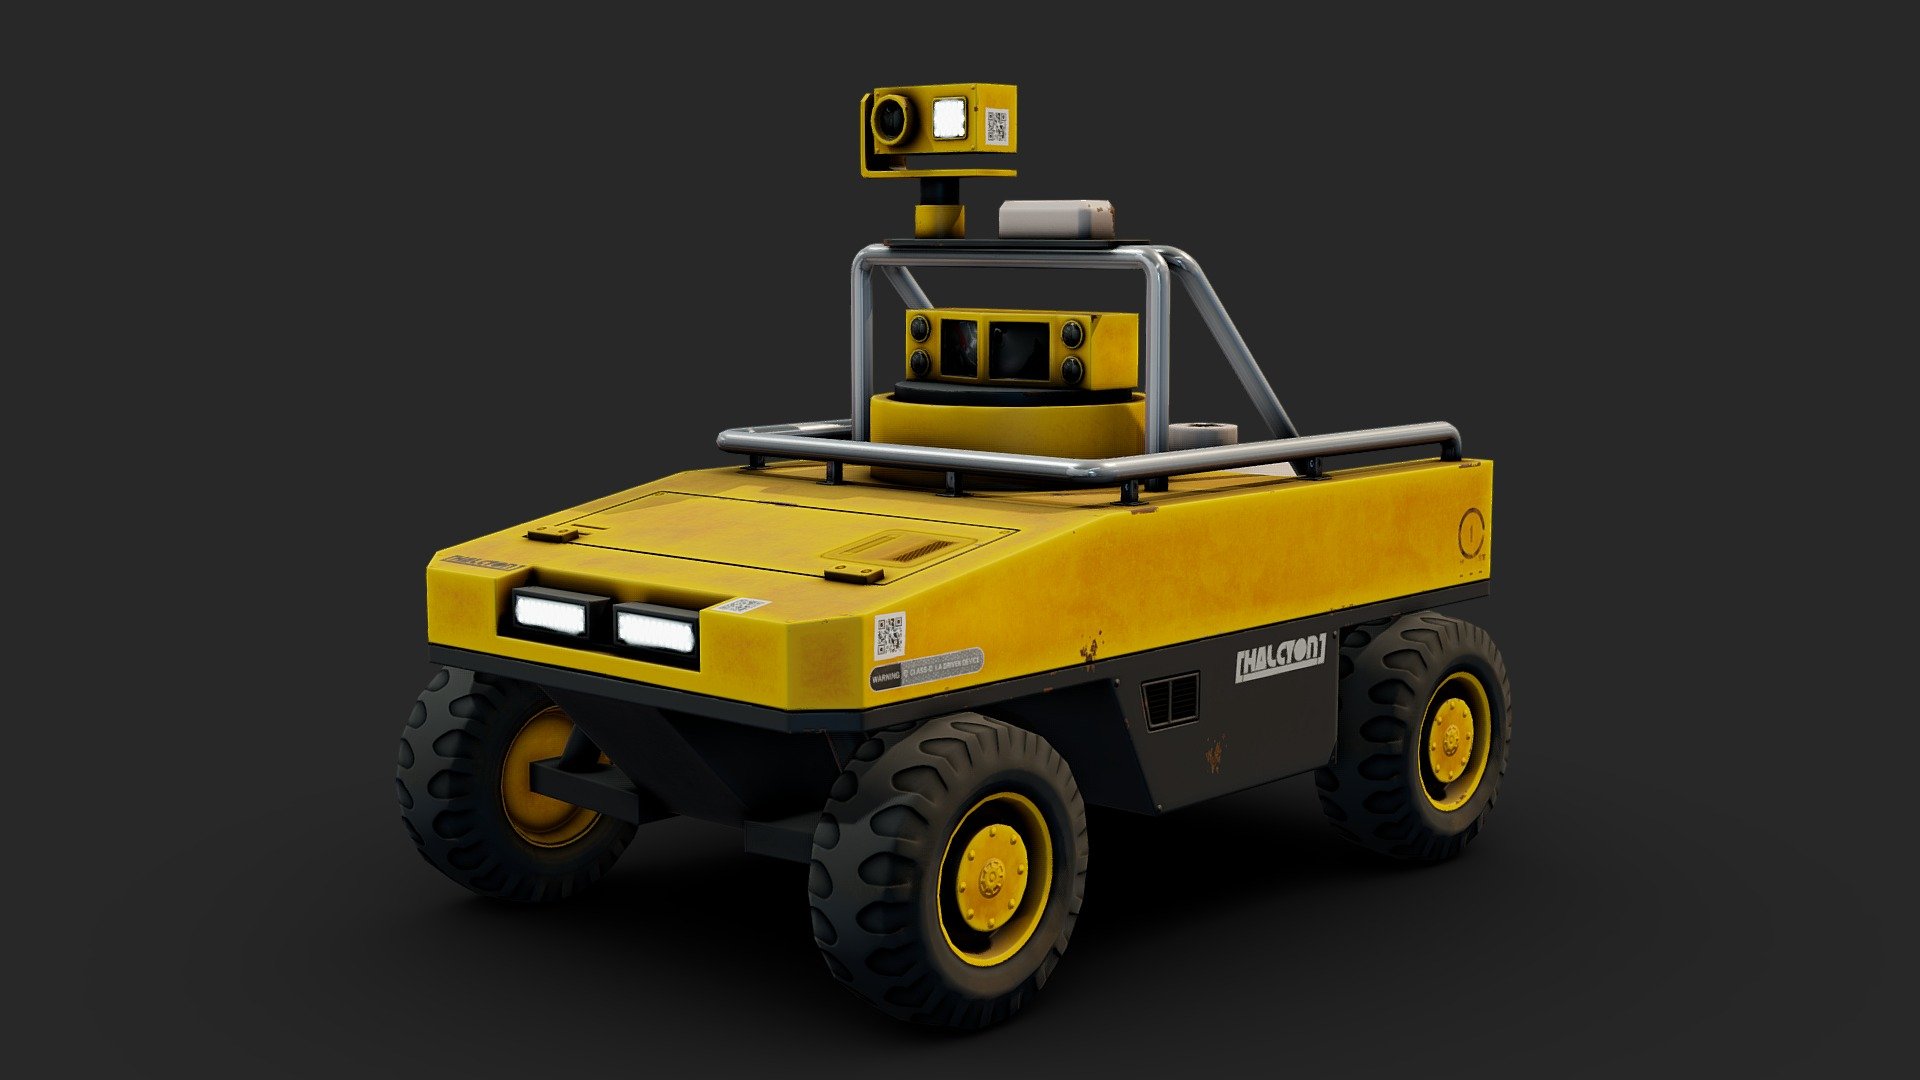 Quick model being used for prototyping a project in UE4

Based on a mixture of military, bomb squad, and rover designs - Unmanned Ground Vehicle (UGV) - 3D model by Renafox (@kryik1023) 3d model